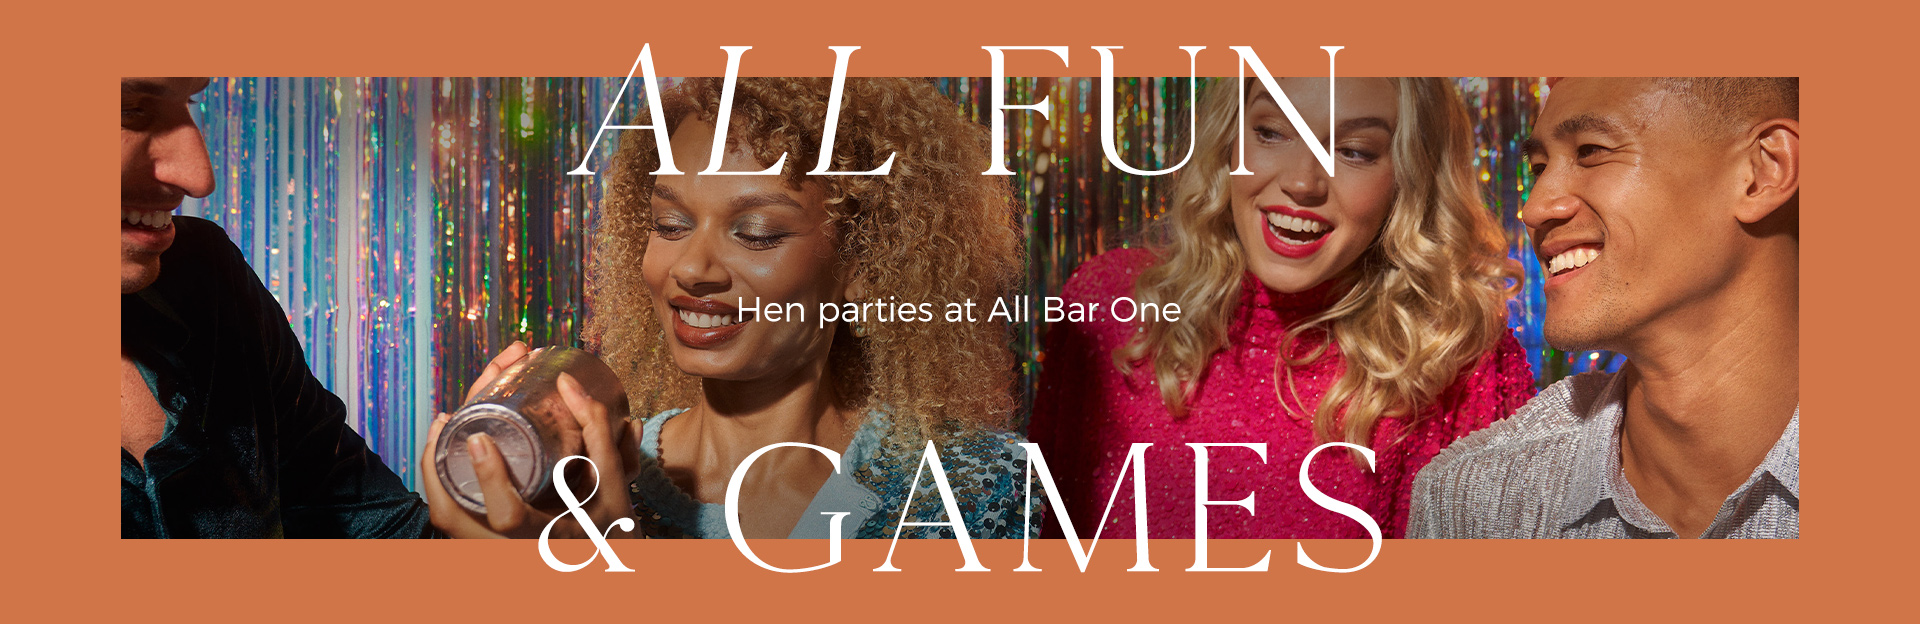 Hen parties at All Bar One Brighton